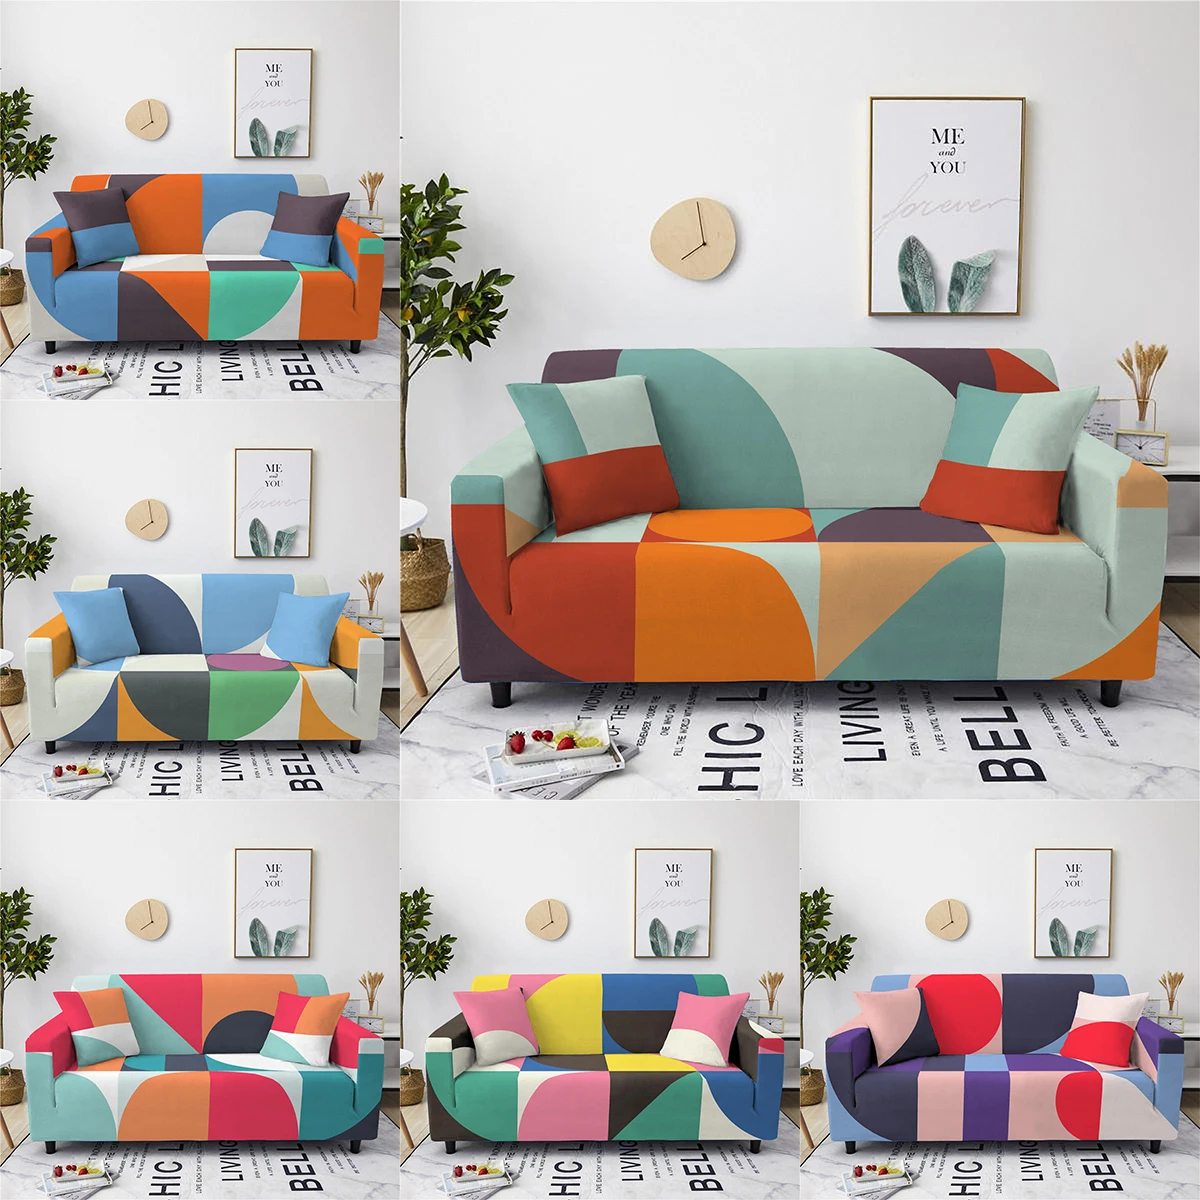 

Geometry Printed Sofa Cover Spandex Couch Covers For Living Room Elastic Armchair Corner Sofa Covers Slipcovers 1/2/3/4 Seater